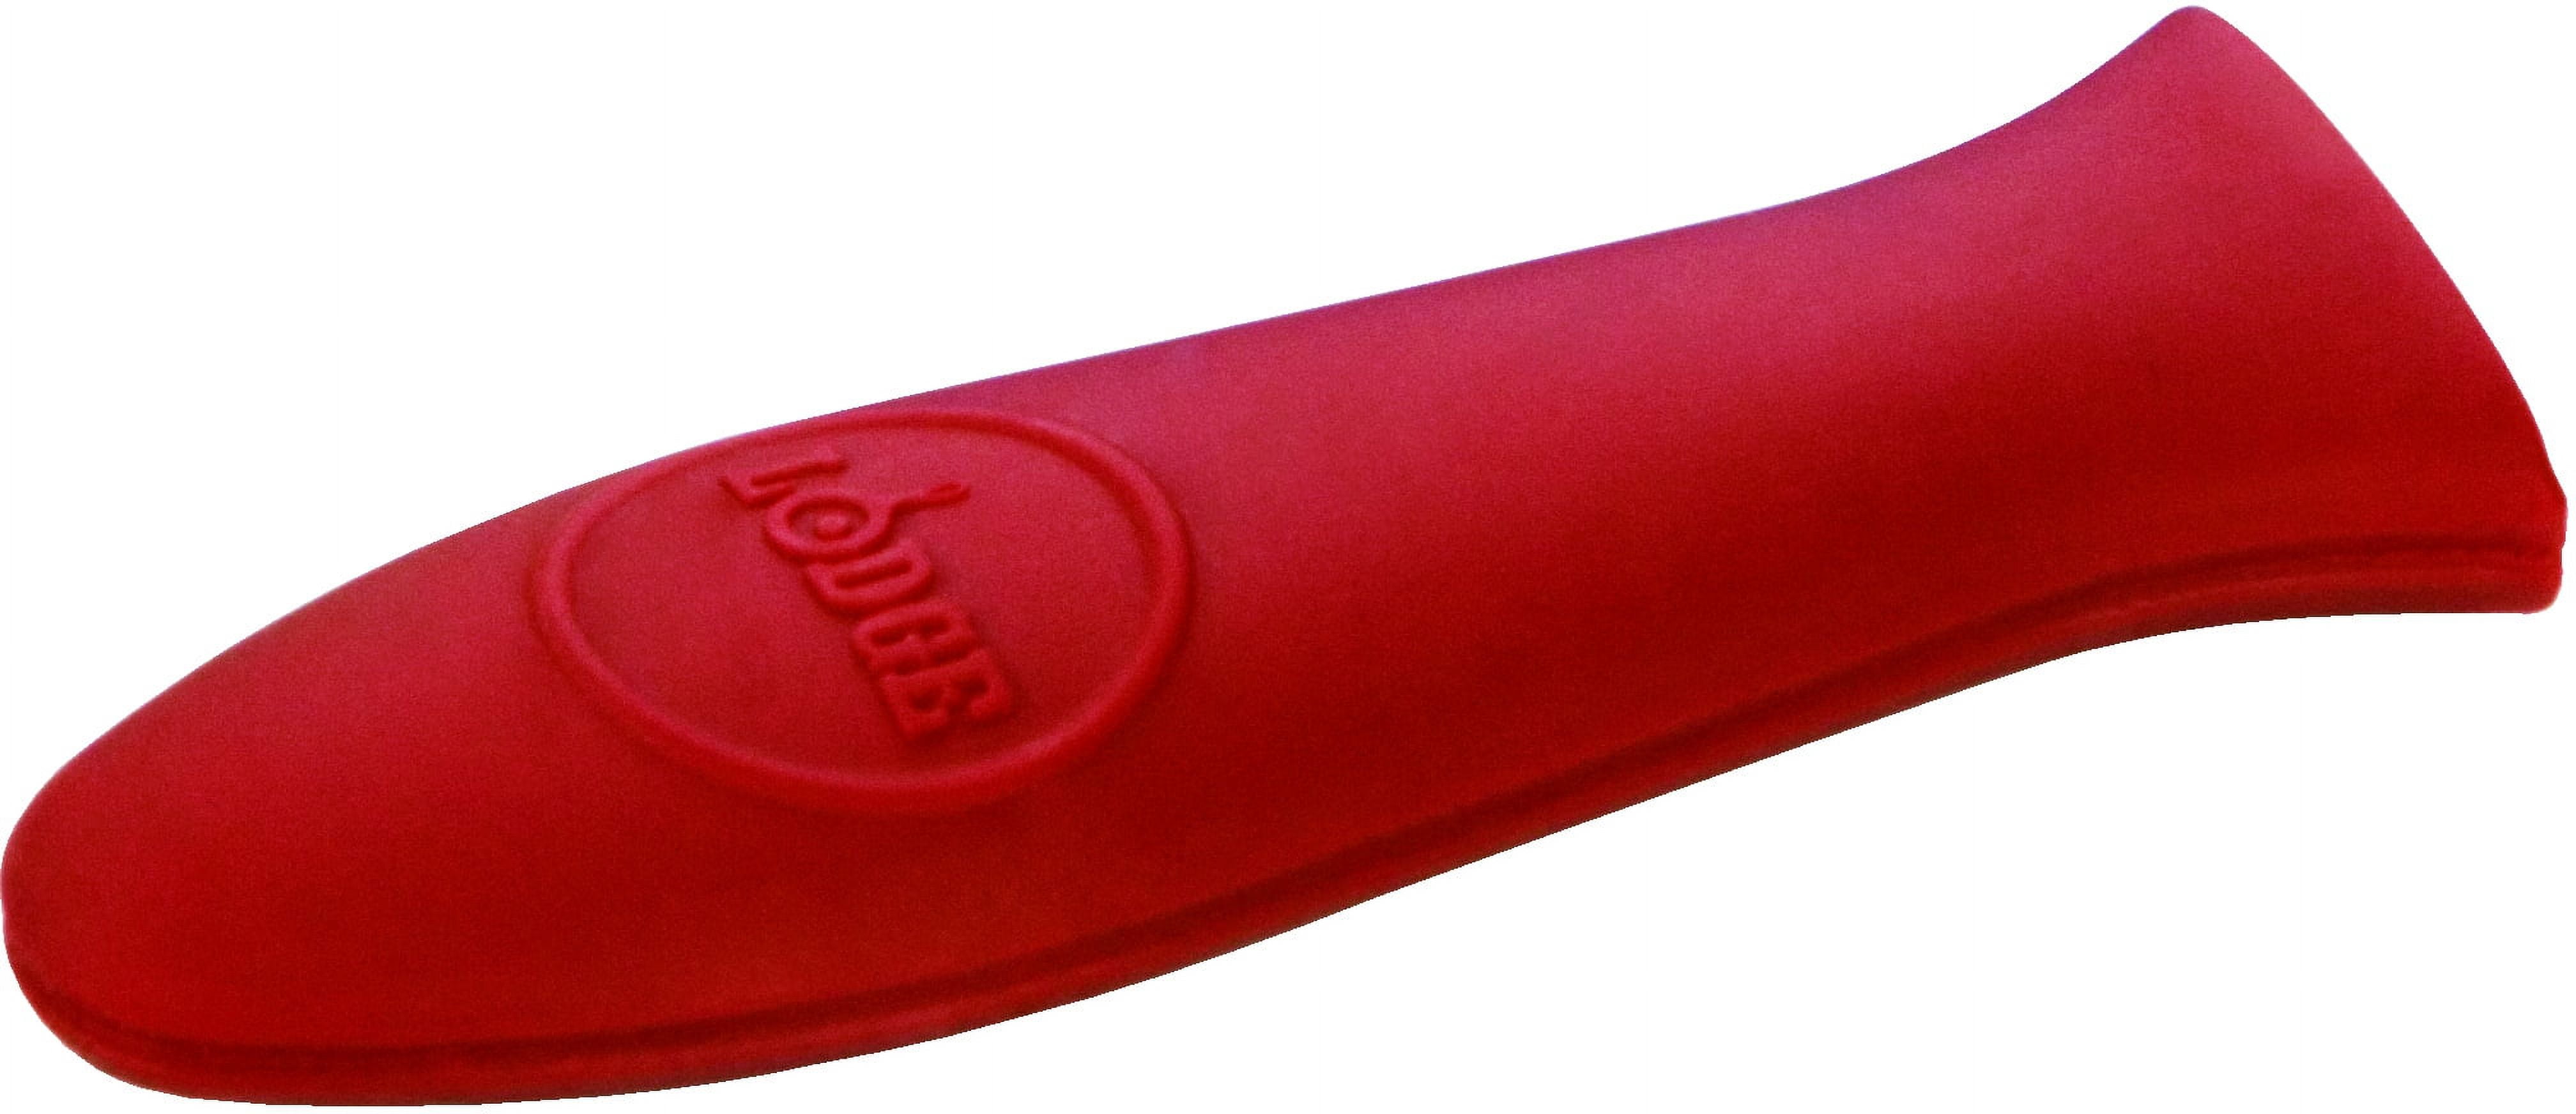 Lodge Silicone 0.7 x 5.5 x 1.8 Red Skillet Handle Holder | at Home